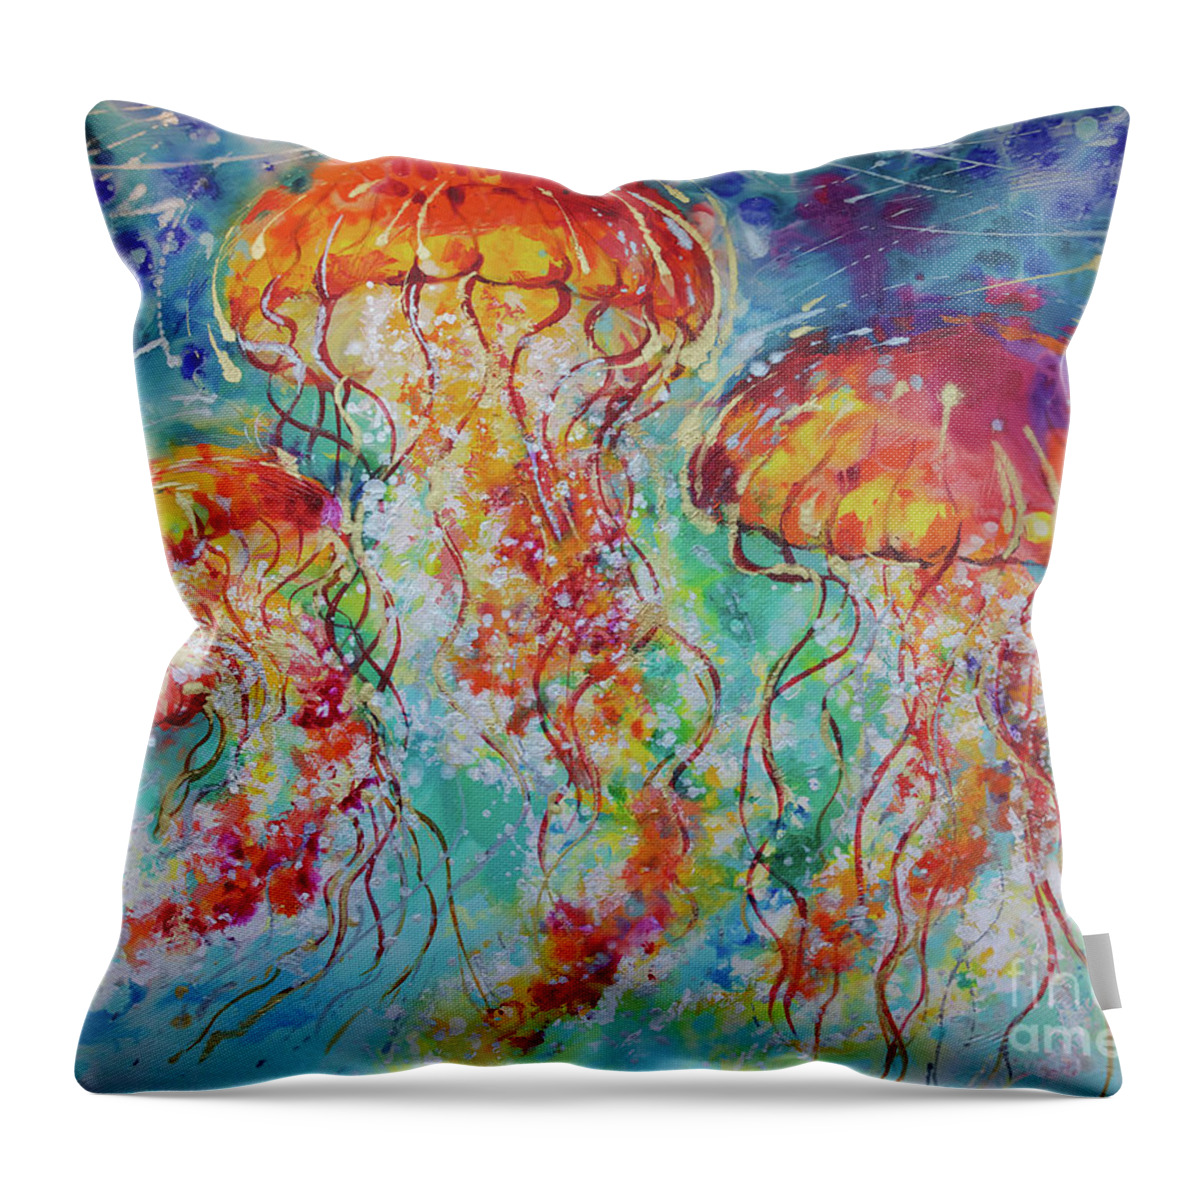  Throw Pillow featuring the painting Vibrant Jellyfish by Jyotika Shroff